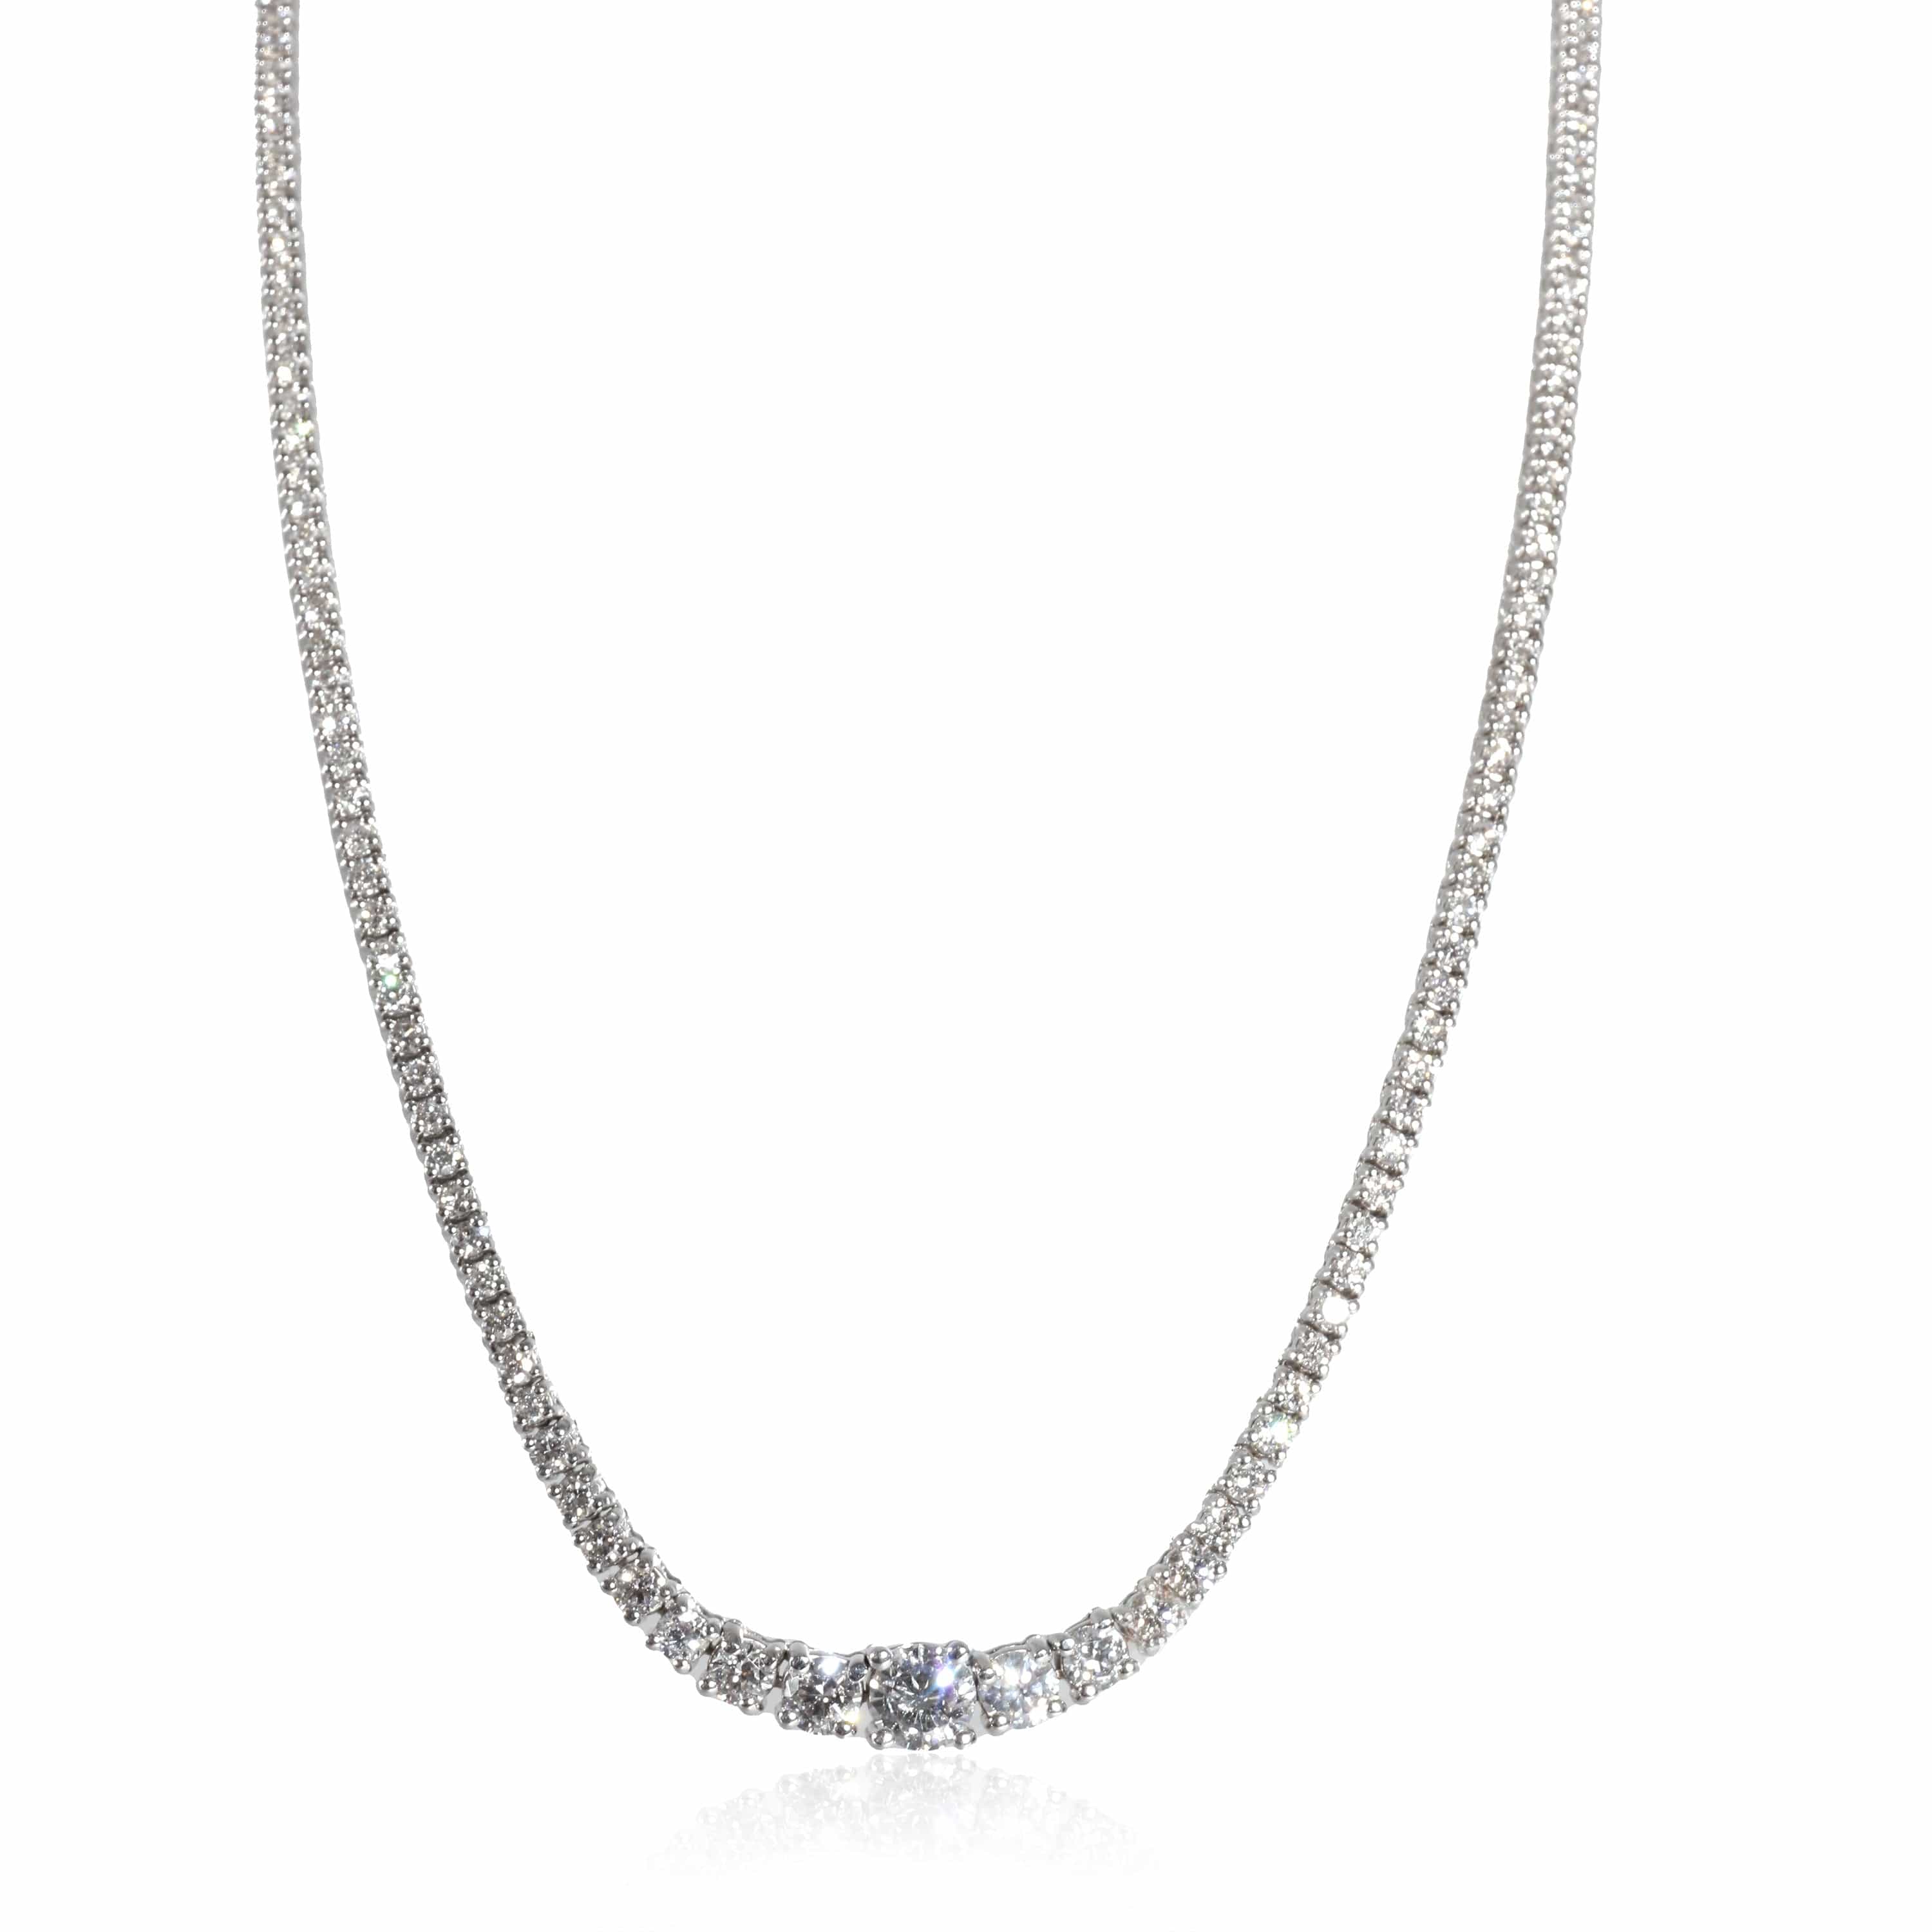 Luxury Promise Diamond Graduated Necklace in 14K White Gold 4.66 ctw